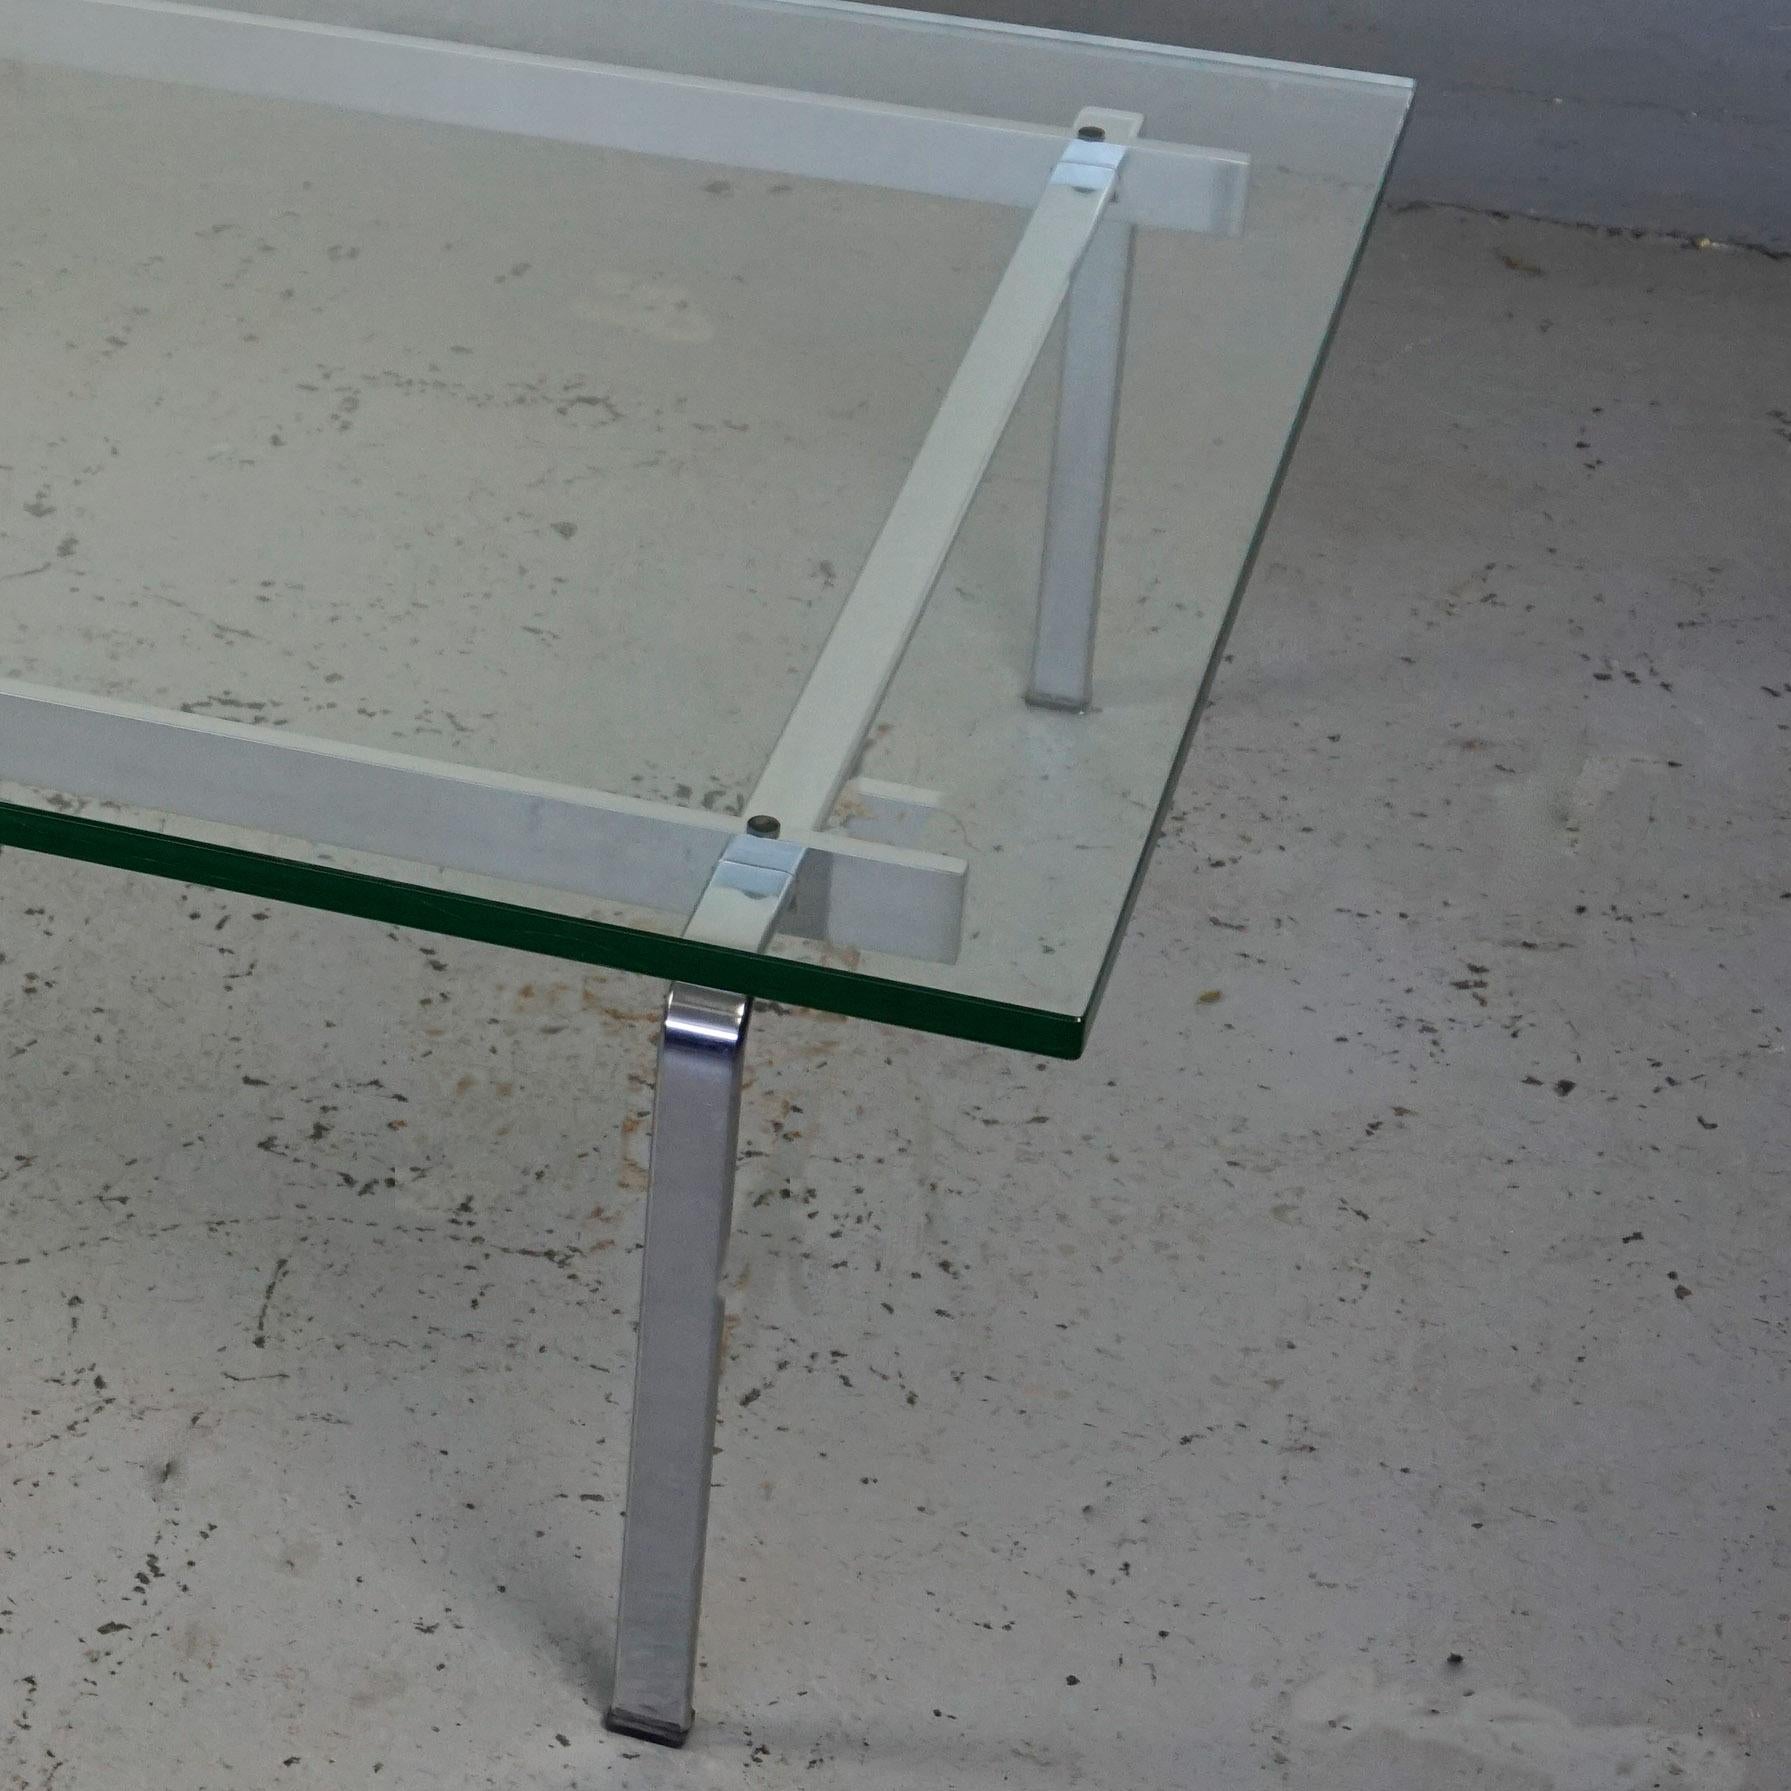 Mid-20th Century Scandinavian Modern Glass and Steel Coffee Table by Fabricius and Kastholm